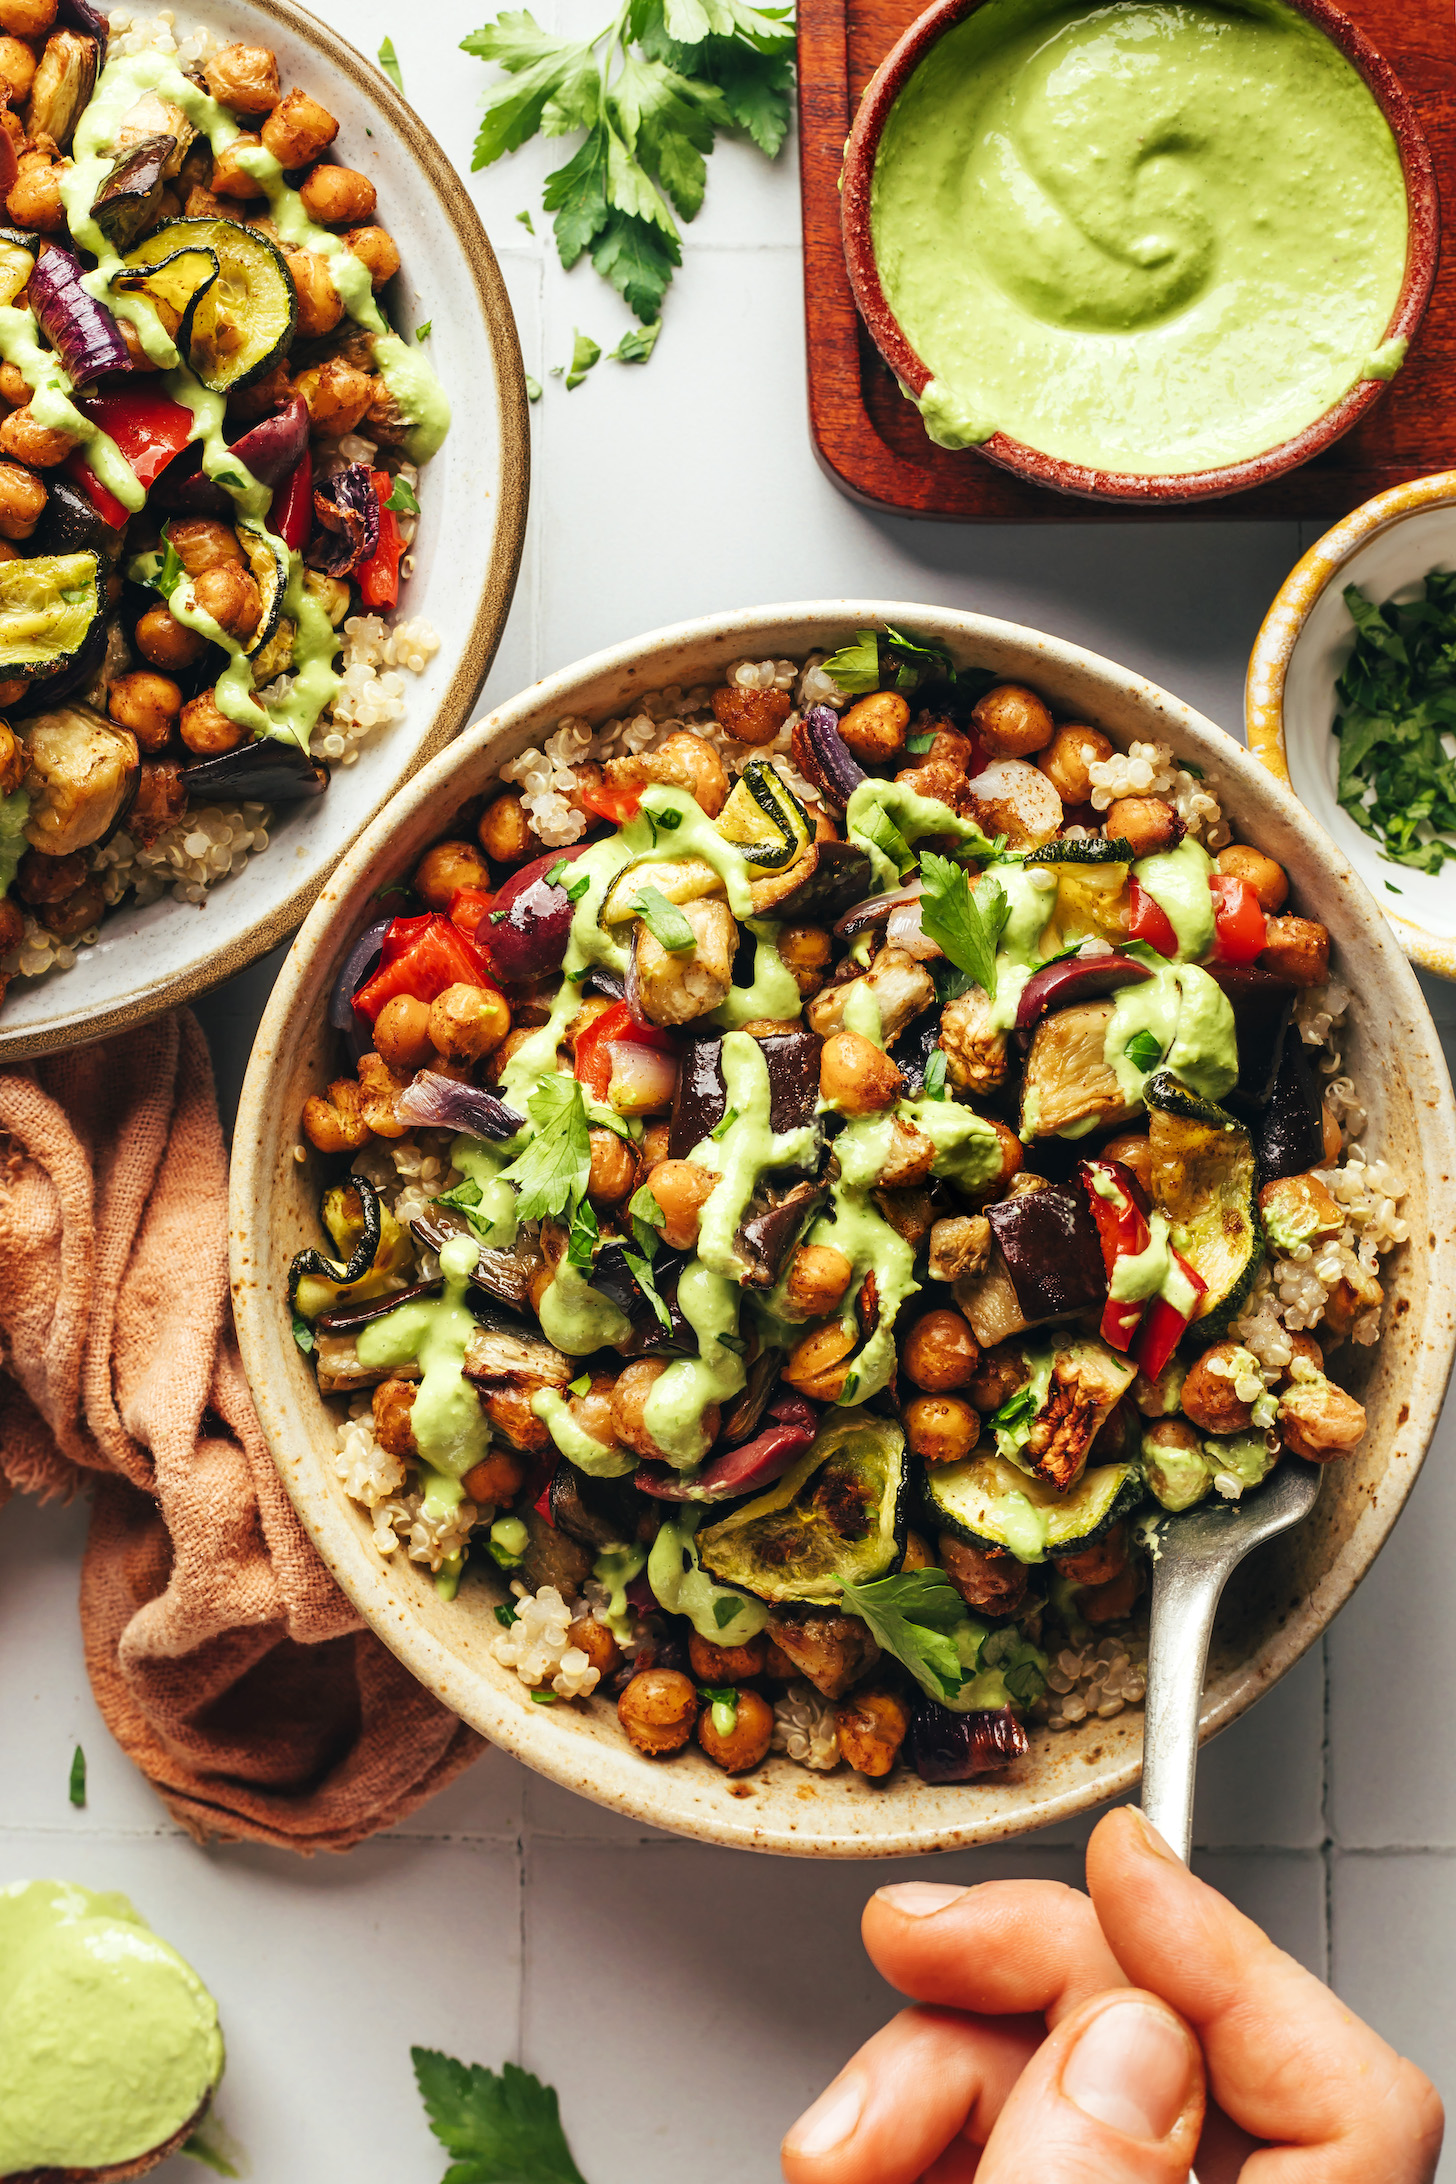 Green tahini sauce drizzled on and in a bowl next to two roasted veggie and chickpea bowls